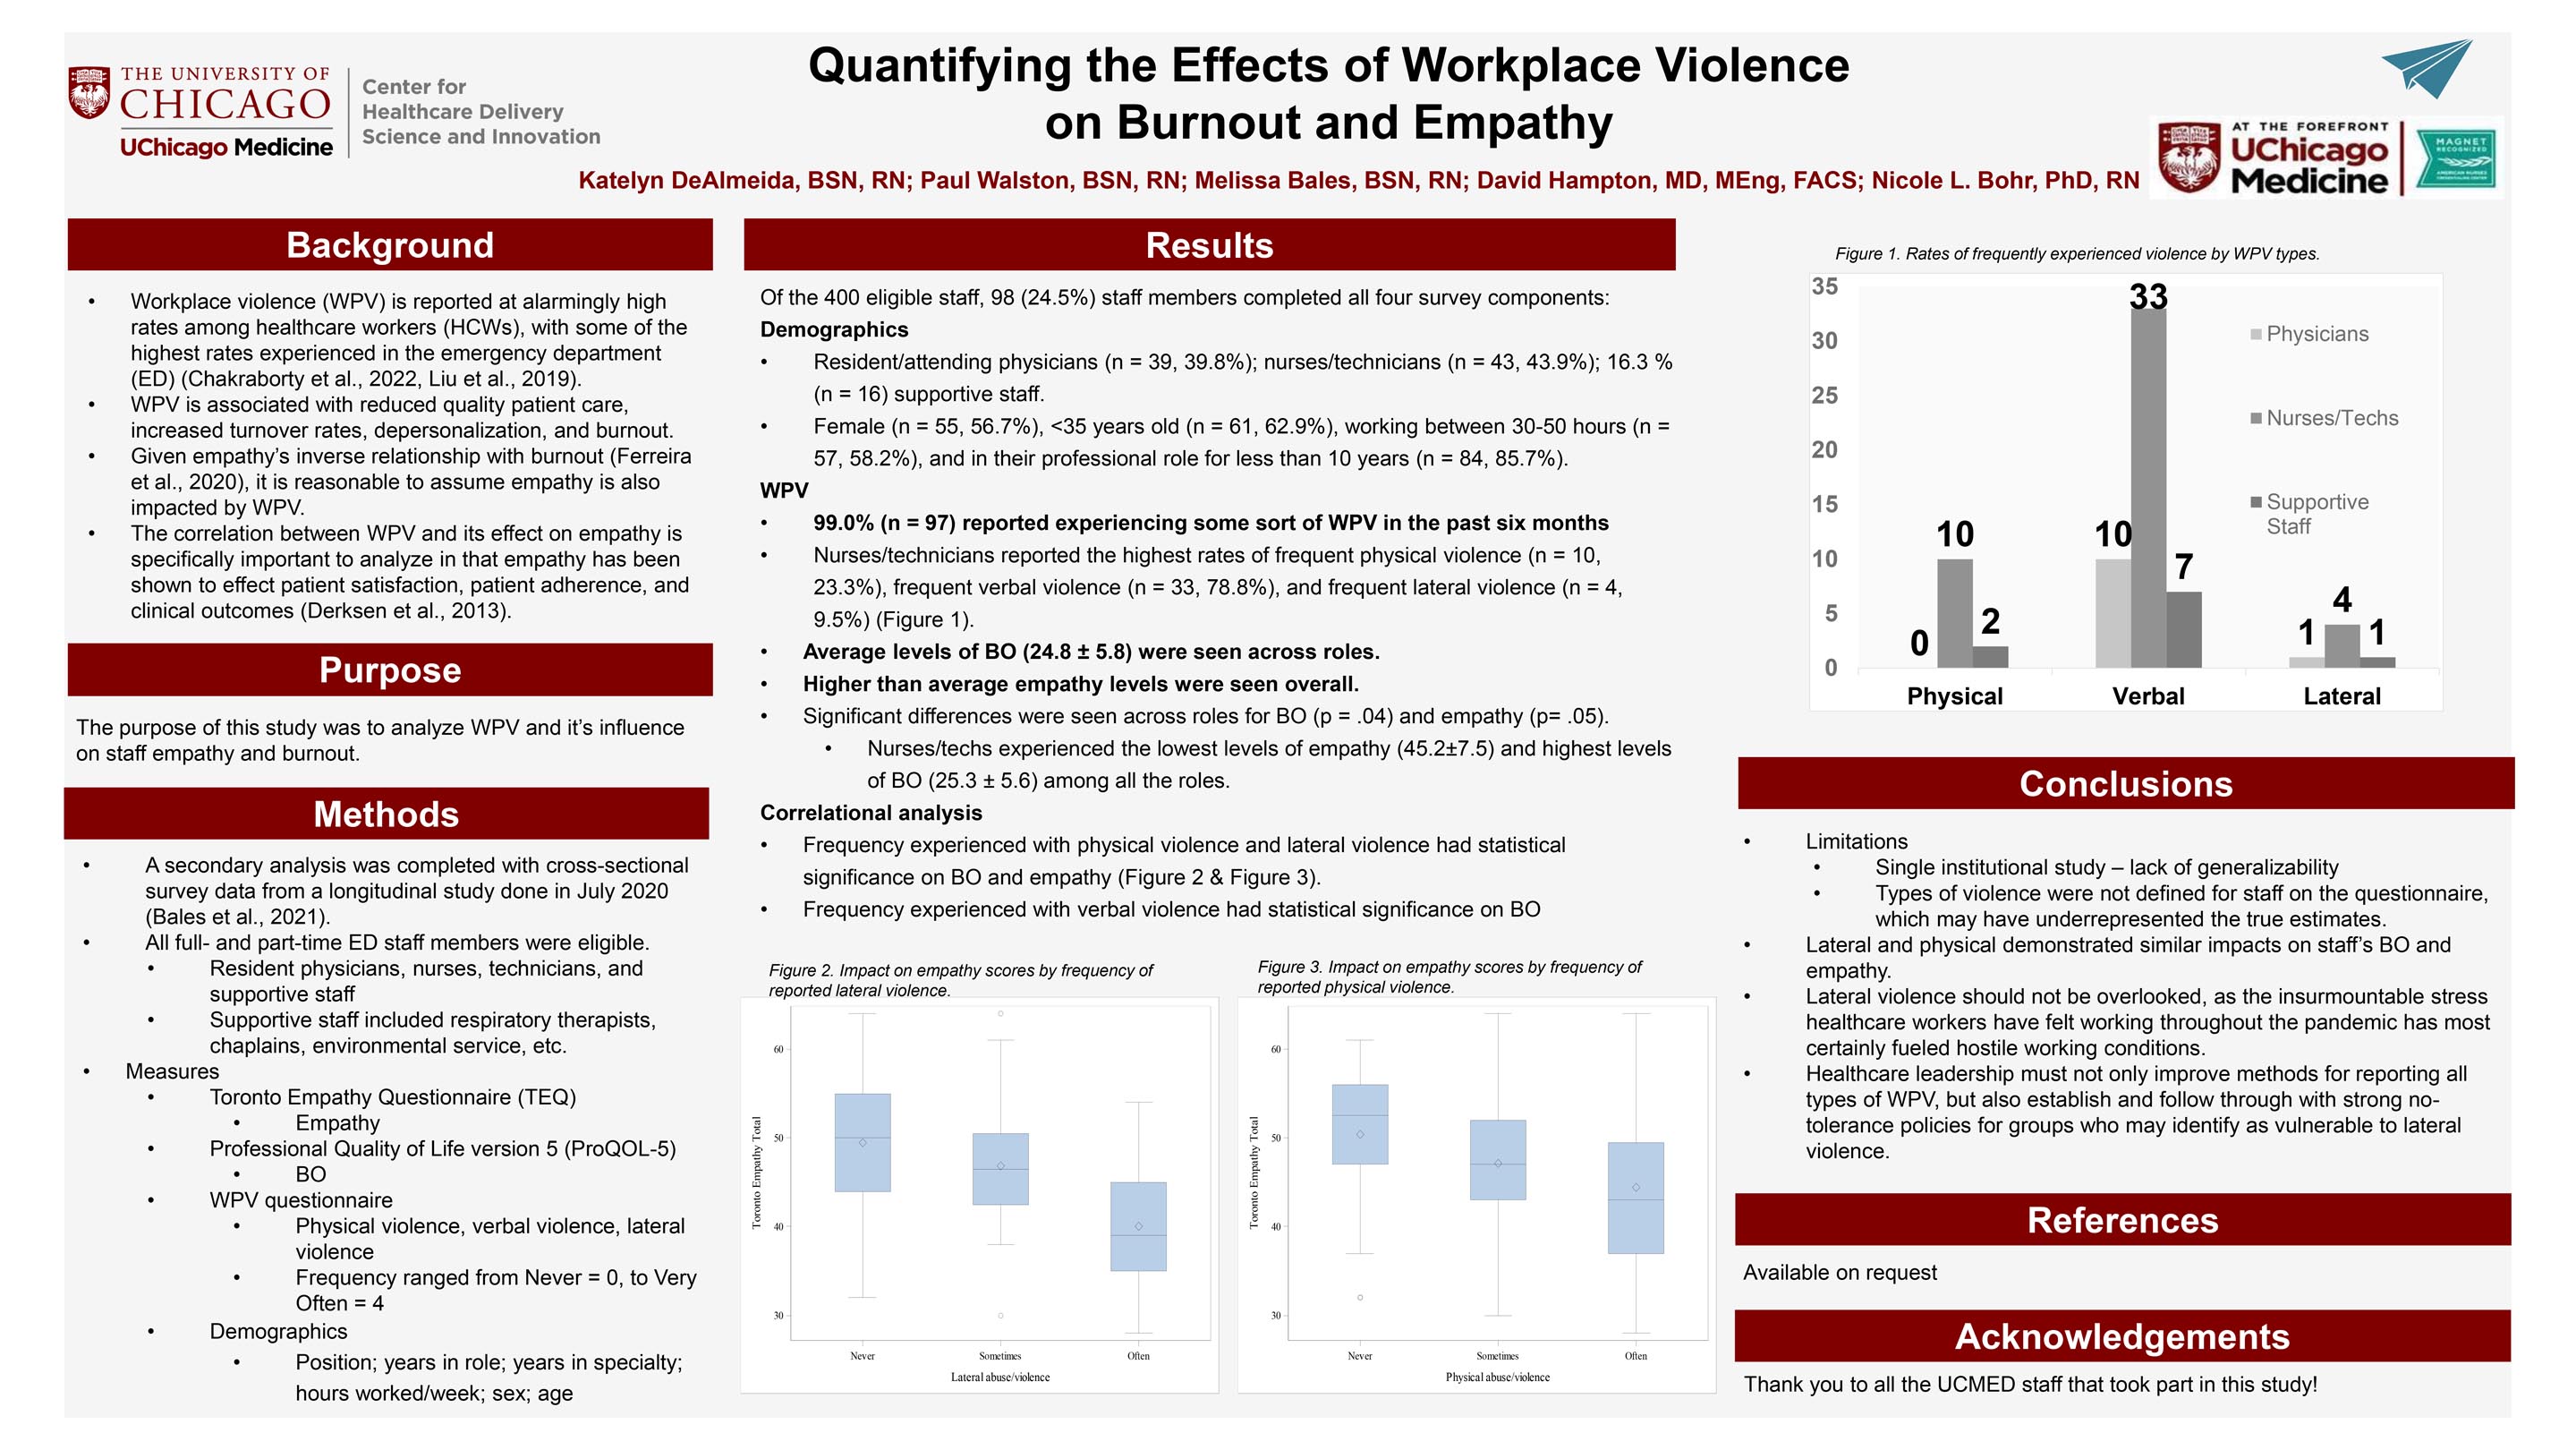 DEALMEIDA_Quantifying the Effects of Workplace Violence on Burnout and Empathy